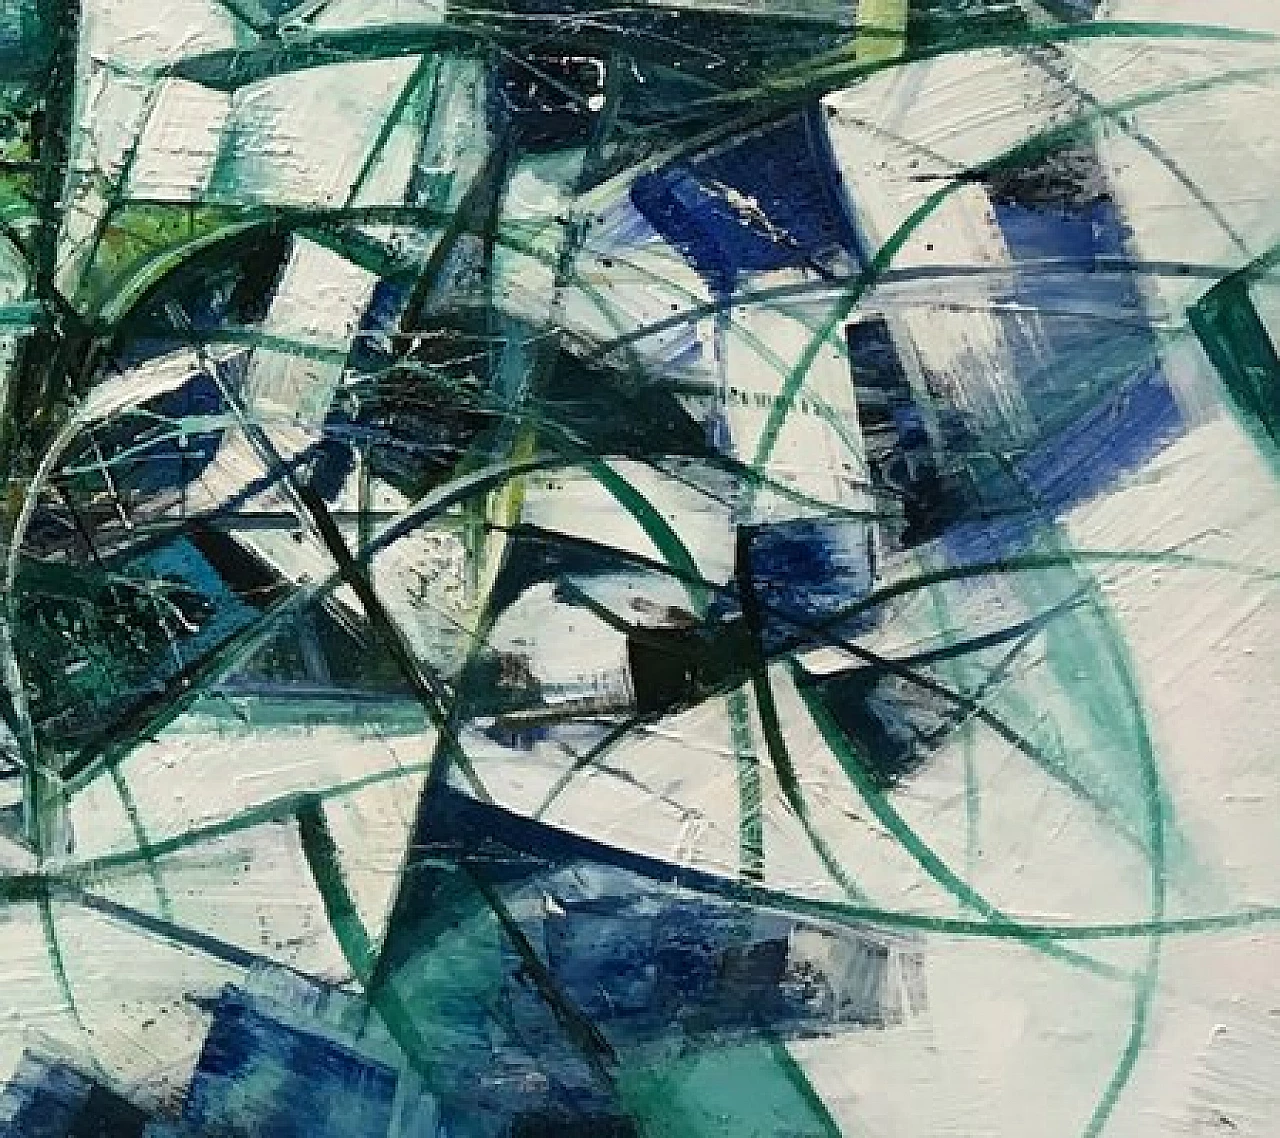 Stefano Iannone, Green Energy, mixed media painting on canvas, 2011 3